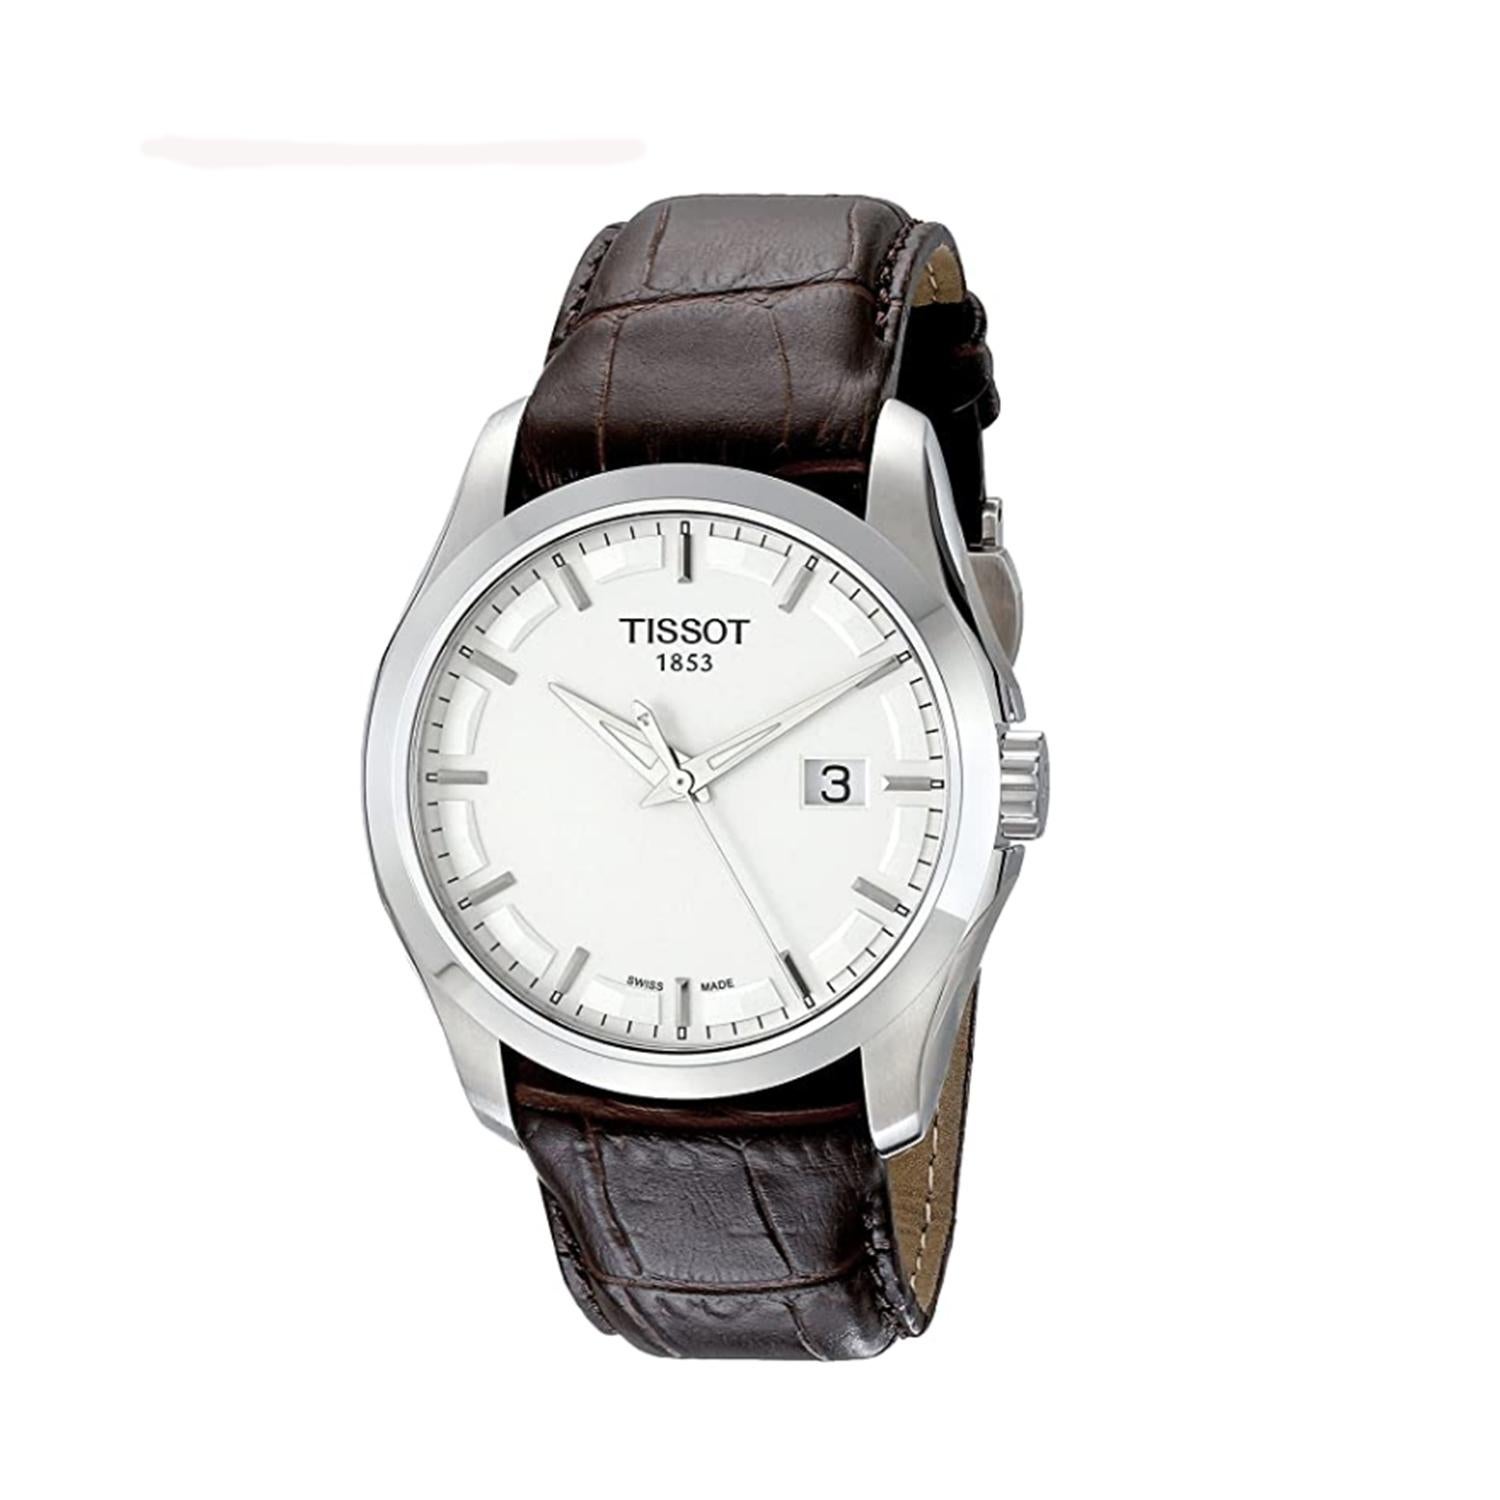 This display model Tissot T-Classic T035.410.16.031.00 is a beautiful men's timepiece that is powered by quartz (battery) movement which is cased in a stainless steel case. It has a round shape face, dial, and has hand sticks style markers. It is